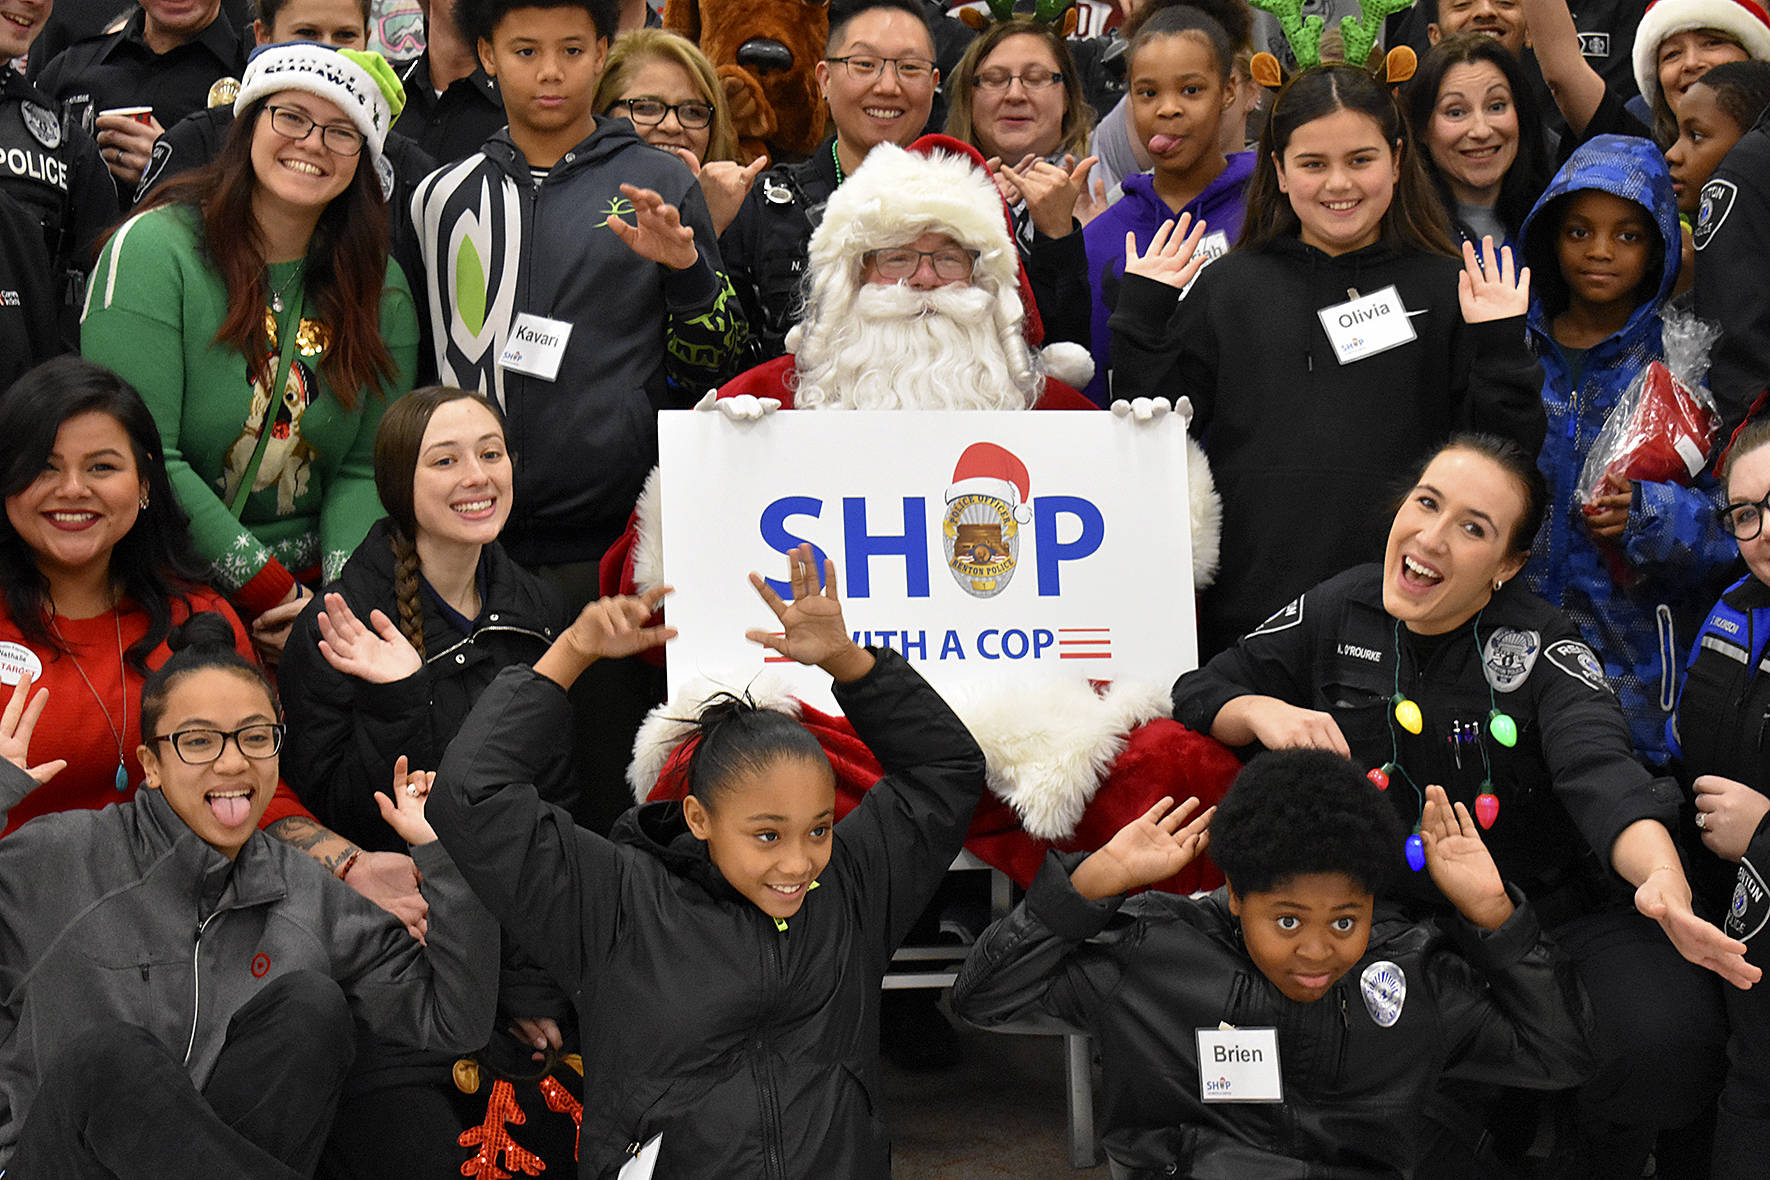 On Saturday, Dec. 14, 15 students were paired with Renton Police Department officers who volunteered their mornings to each kid’s family wish list at 2019 Shop with a Cop.